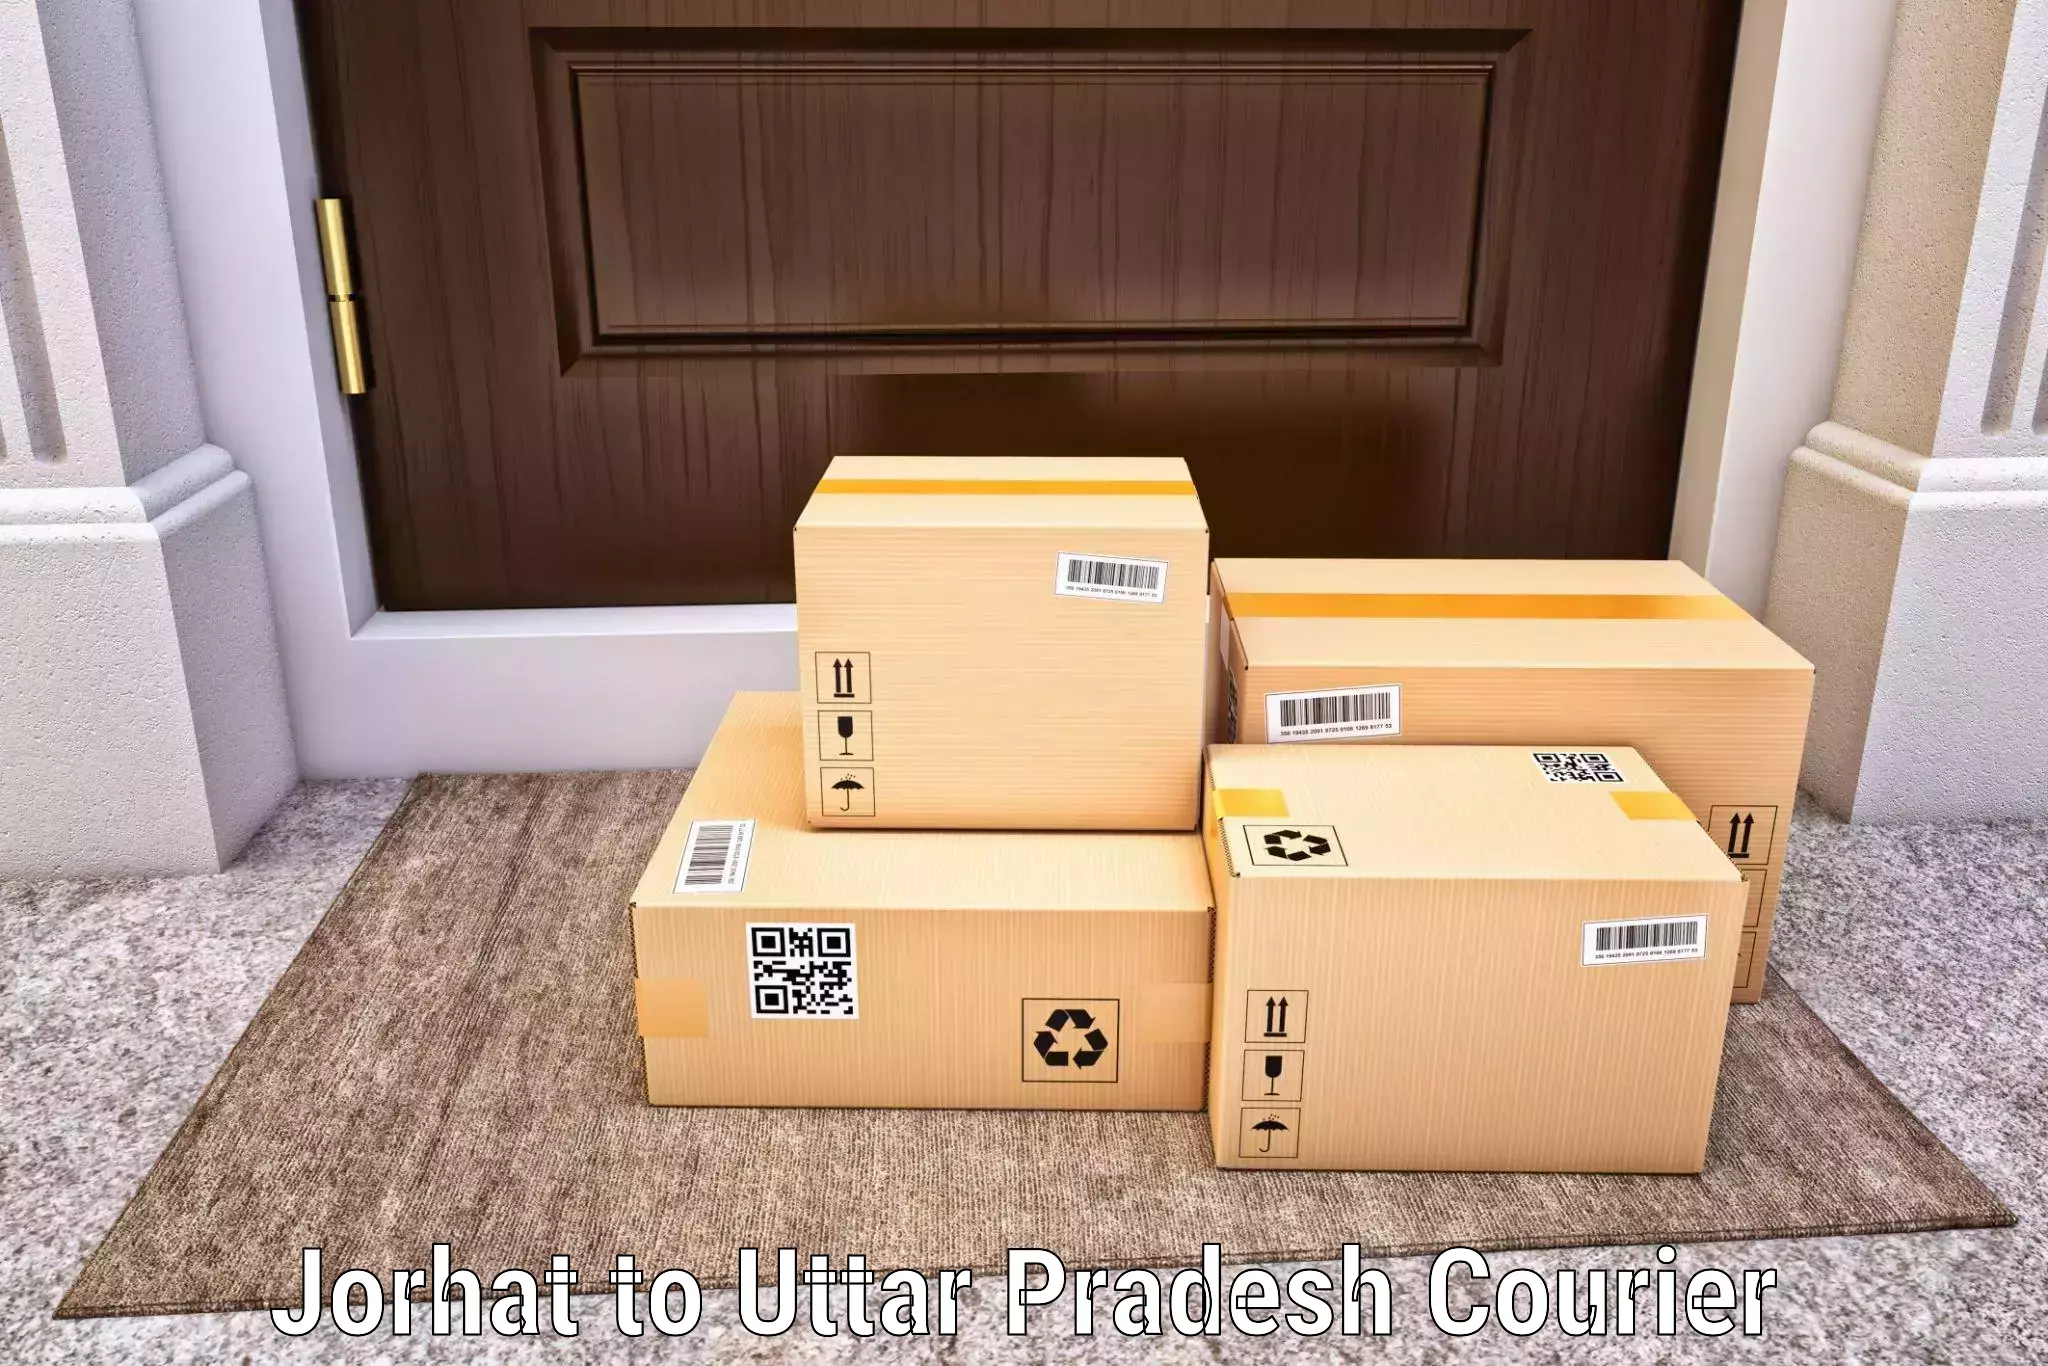 Courier service booking Jorhat to Utraula